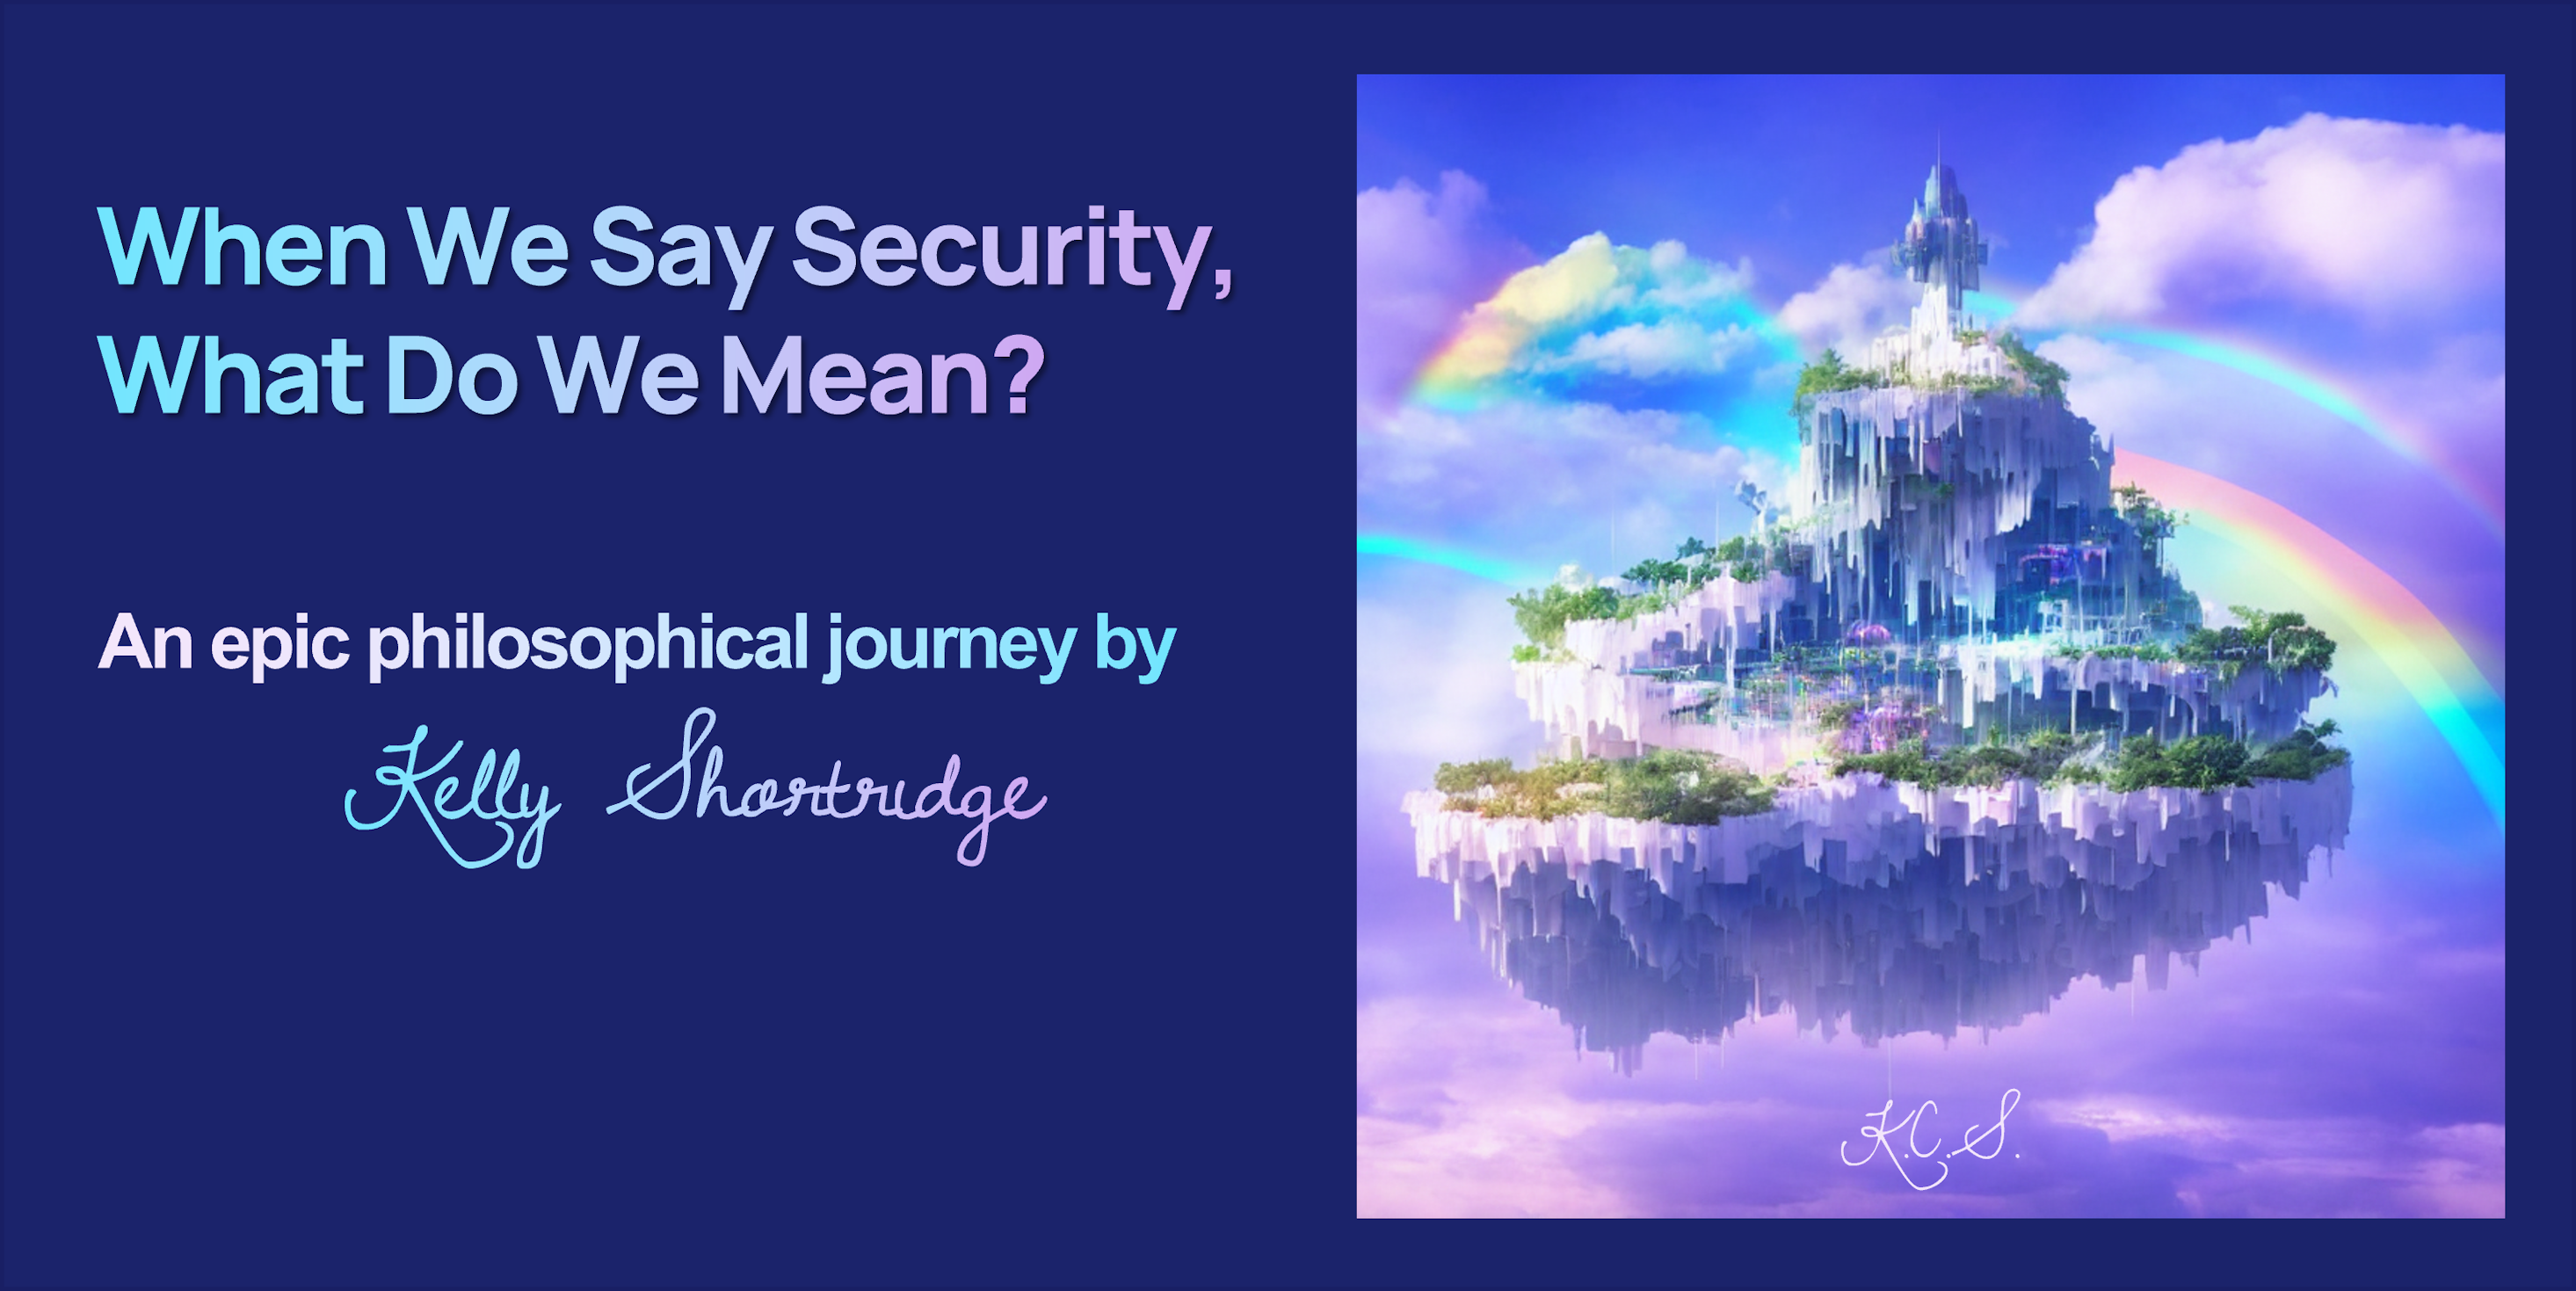 A hero image with the blog title, When we say security, what do we mean? It is a philosophical essay by Kelly Shortridge. The image to the right of the text is an AI-generated image initialed by yours truly. It depicts an island floating in a sky filled with rainbow and pastel clouds in shades of periwinkle and violet. The island itself is a paradise, a blend of fantasy and cyberpunk aesthetics. Lush trees blanket its ledges while waterfalls cascade from each ledge, frozen in time and resembling a beautiful digital glitch. It is meant to reflect the utopia we might achieve with our systems &ndash; our own islands &ndash; if we embraced the original meanings of the word security.